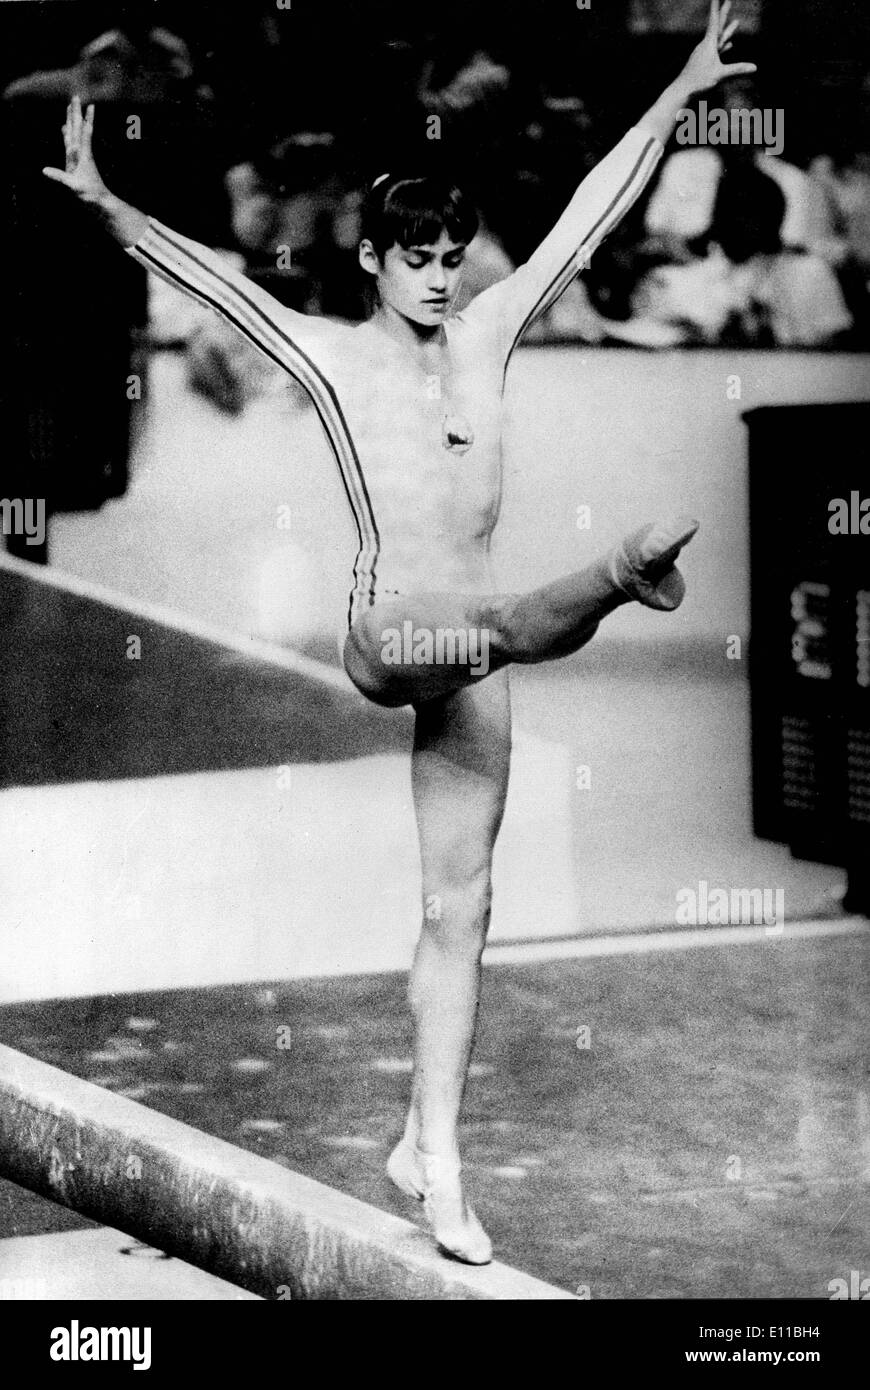 Jul 23, 1976; Montreal, Canada; 14 year old Romanian gymnastic star NADAI COMANECI (pictured) performing on the beam in which Stock Photo